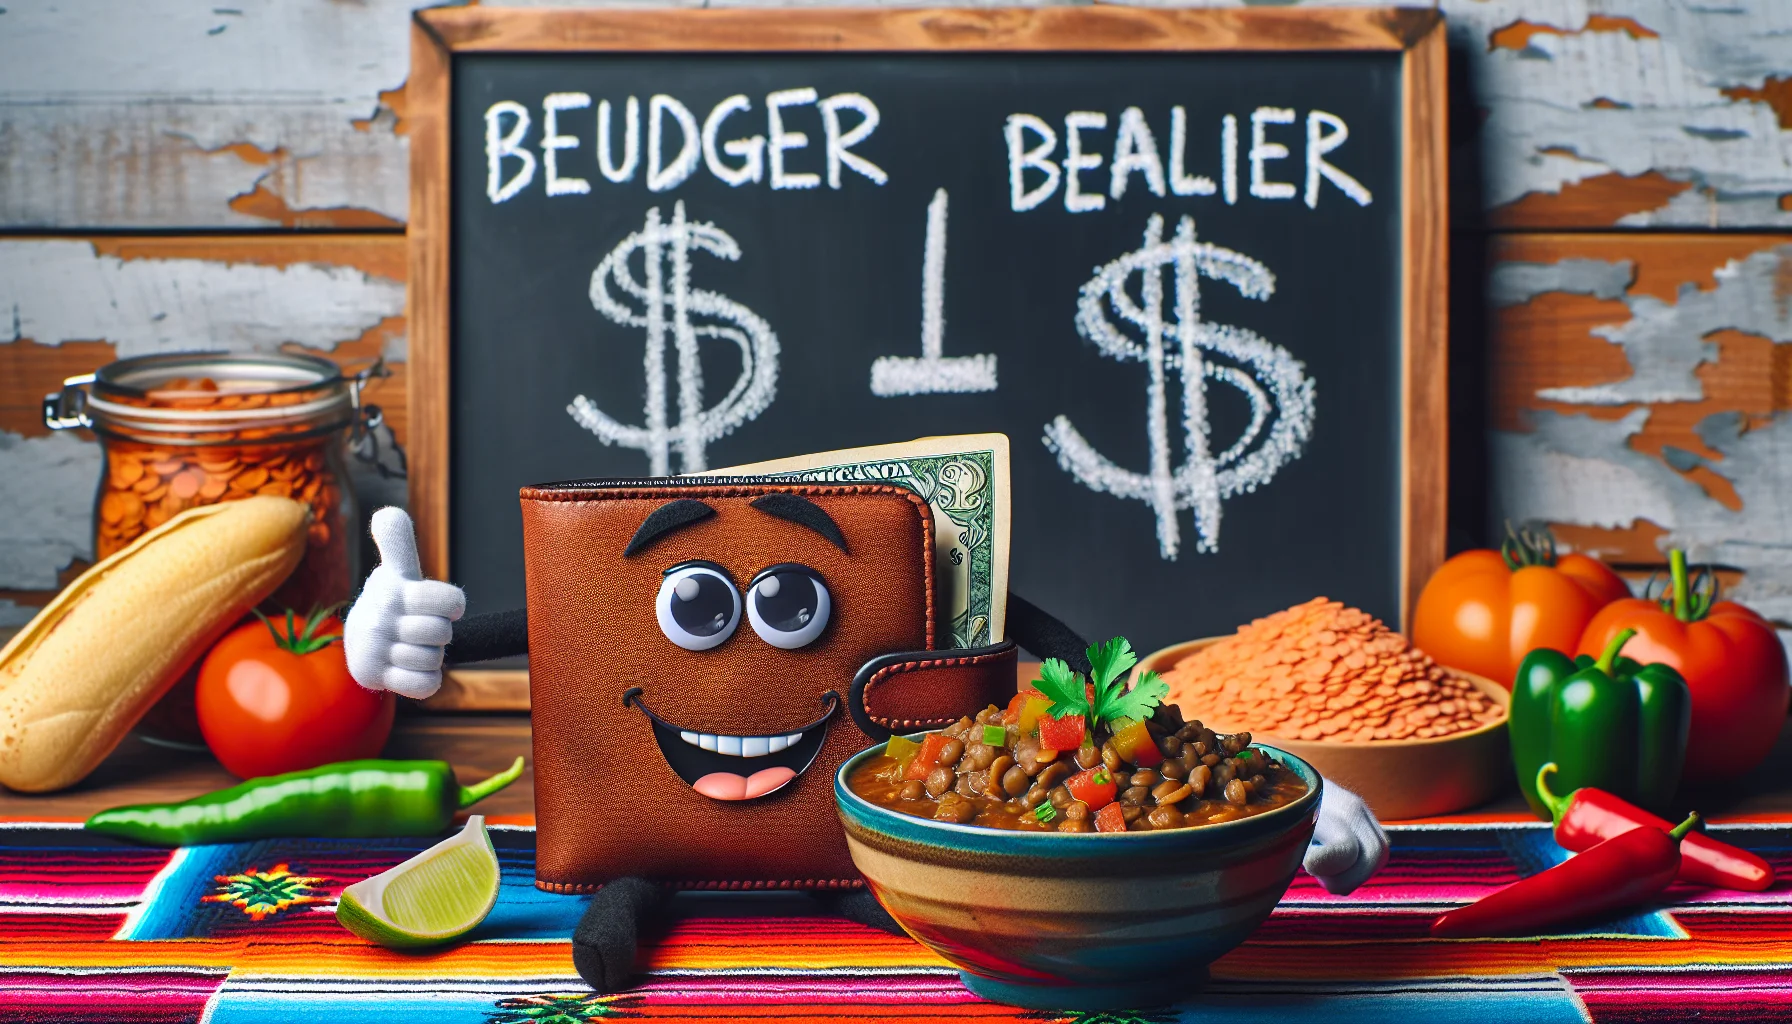 Picture a humorous scene promoting budget-friendly, wholesome eating with a delicious Mexican lentil soup on display. A bowl of this delightful vegetarian soup is dominated by brown lentils, diced tomatoes, and vibrant bell peppers, topped with a sprinkle of fresh cilantro. A playful anthropomorphic wallet, grinning with a thumbs-up, takes centre stage endorsing the soup. The ambiance is convivial, with a festive tablecloth portraying traditional Mexican patterns. In the background, a chalkboard Juxtaposes the cost of a fast-food meal against the healthier, economical Mexican lentil soup, emphasizing affordability and nutrition. The message is clear: Eating healthy doesn't need to break the bank.